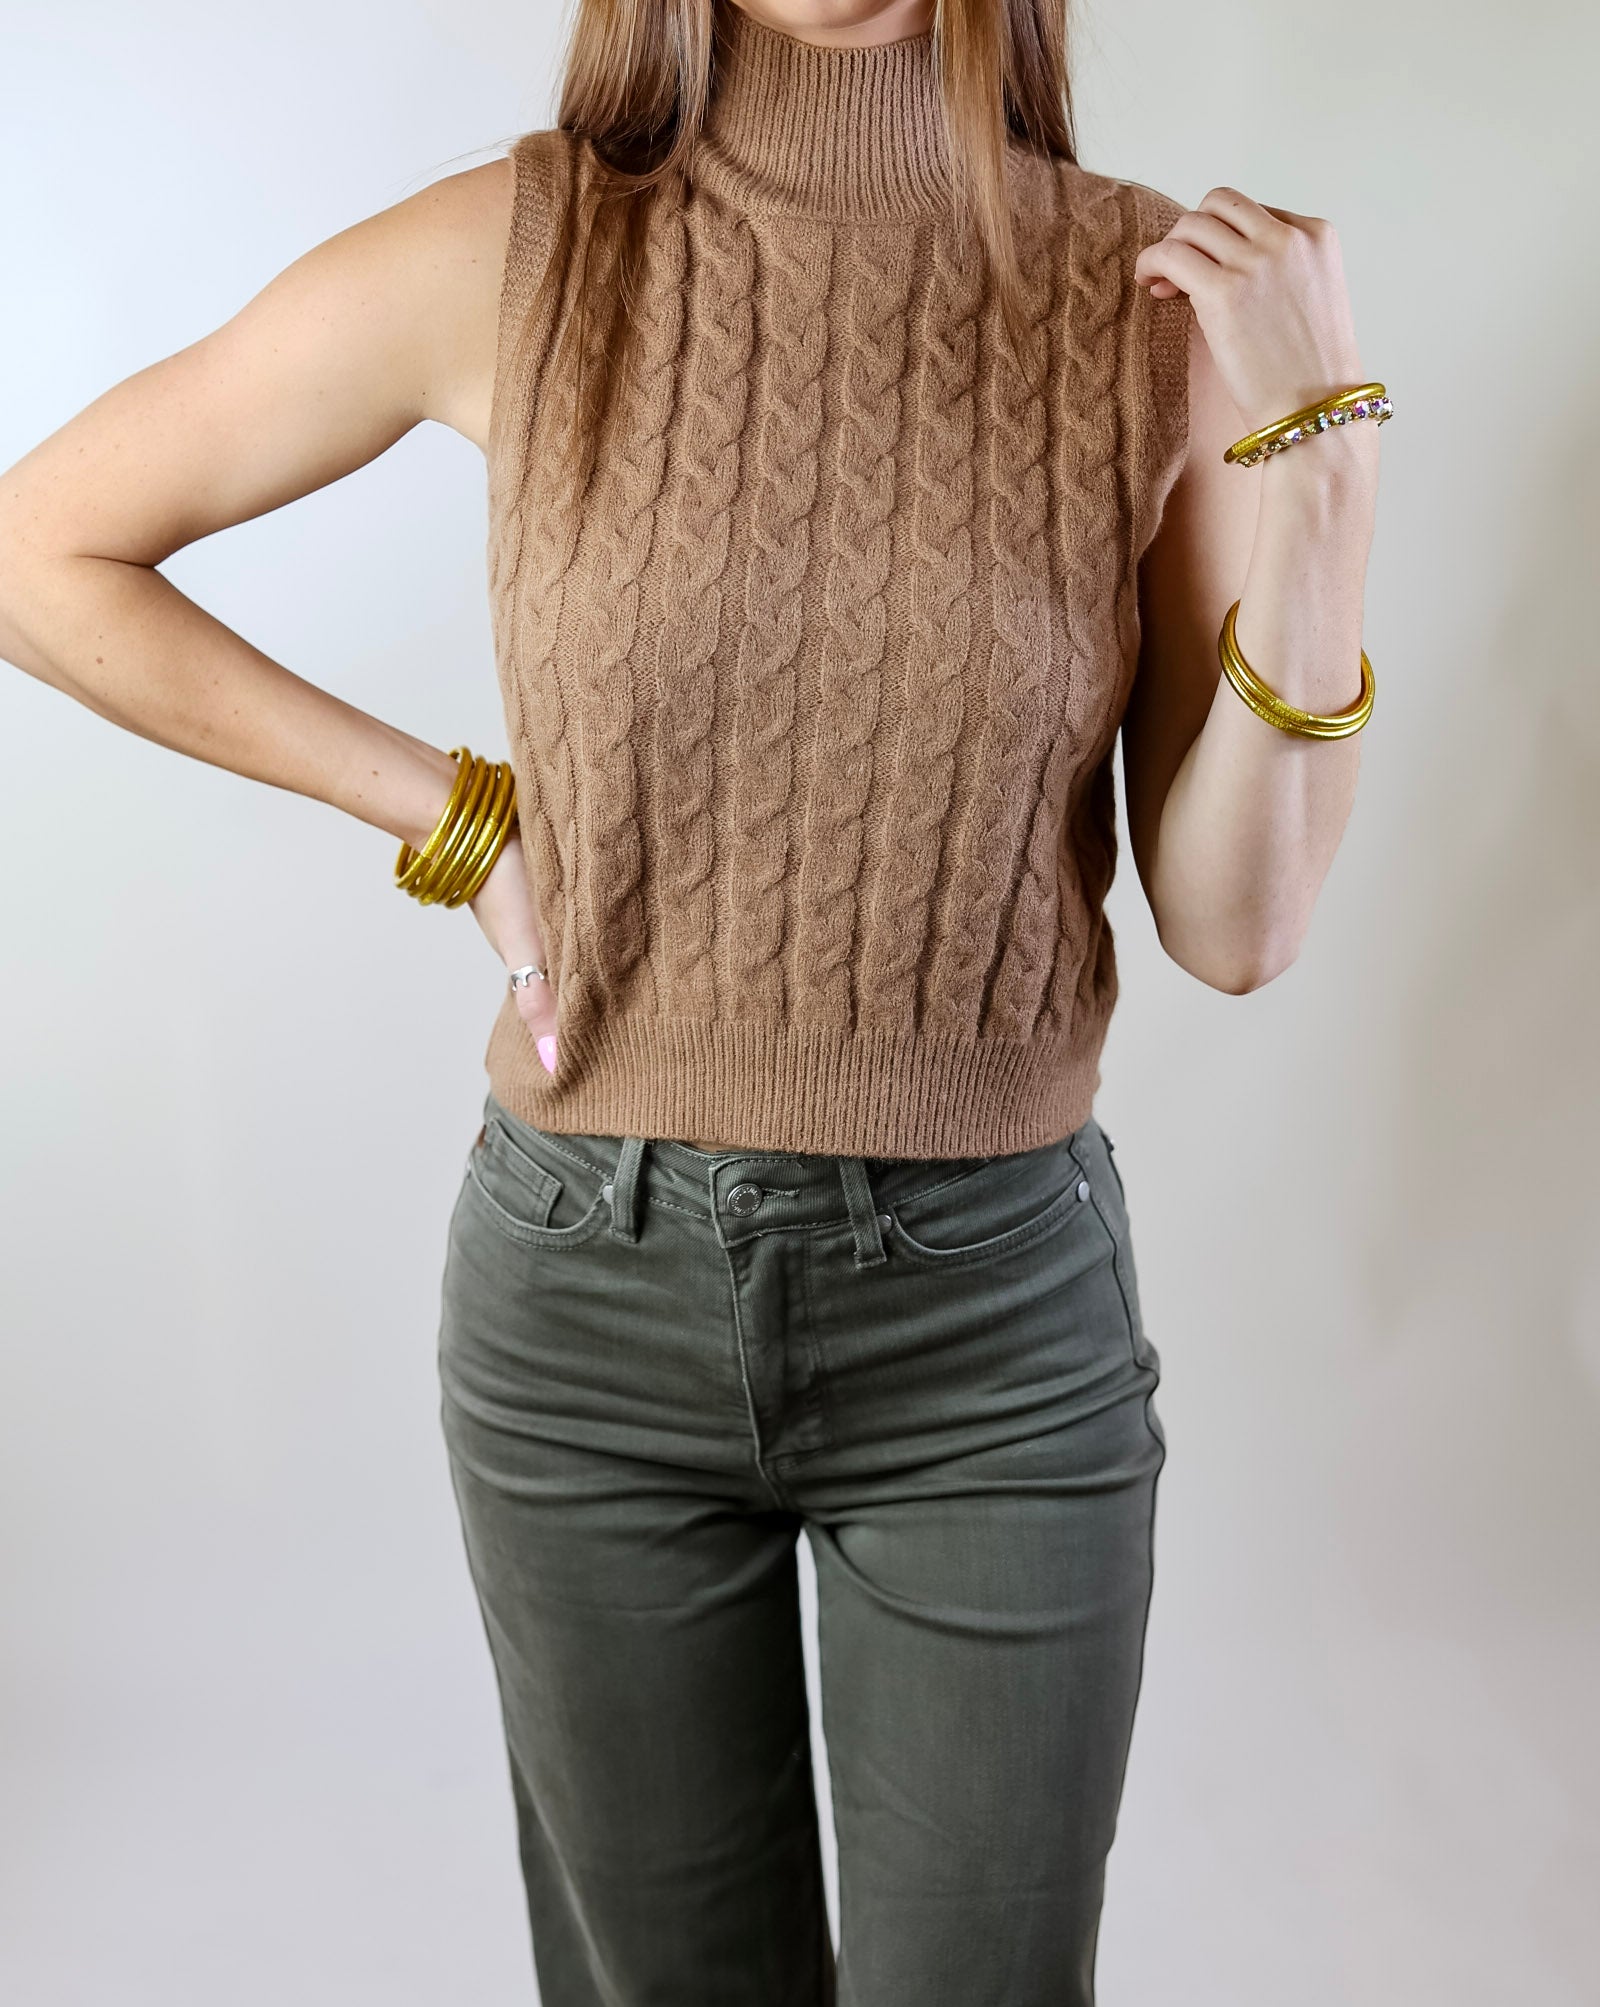 Cider Sips Cropped Sweater Tank Top with High Neck in Camel Brown - Giddy Up Glamour Boutique